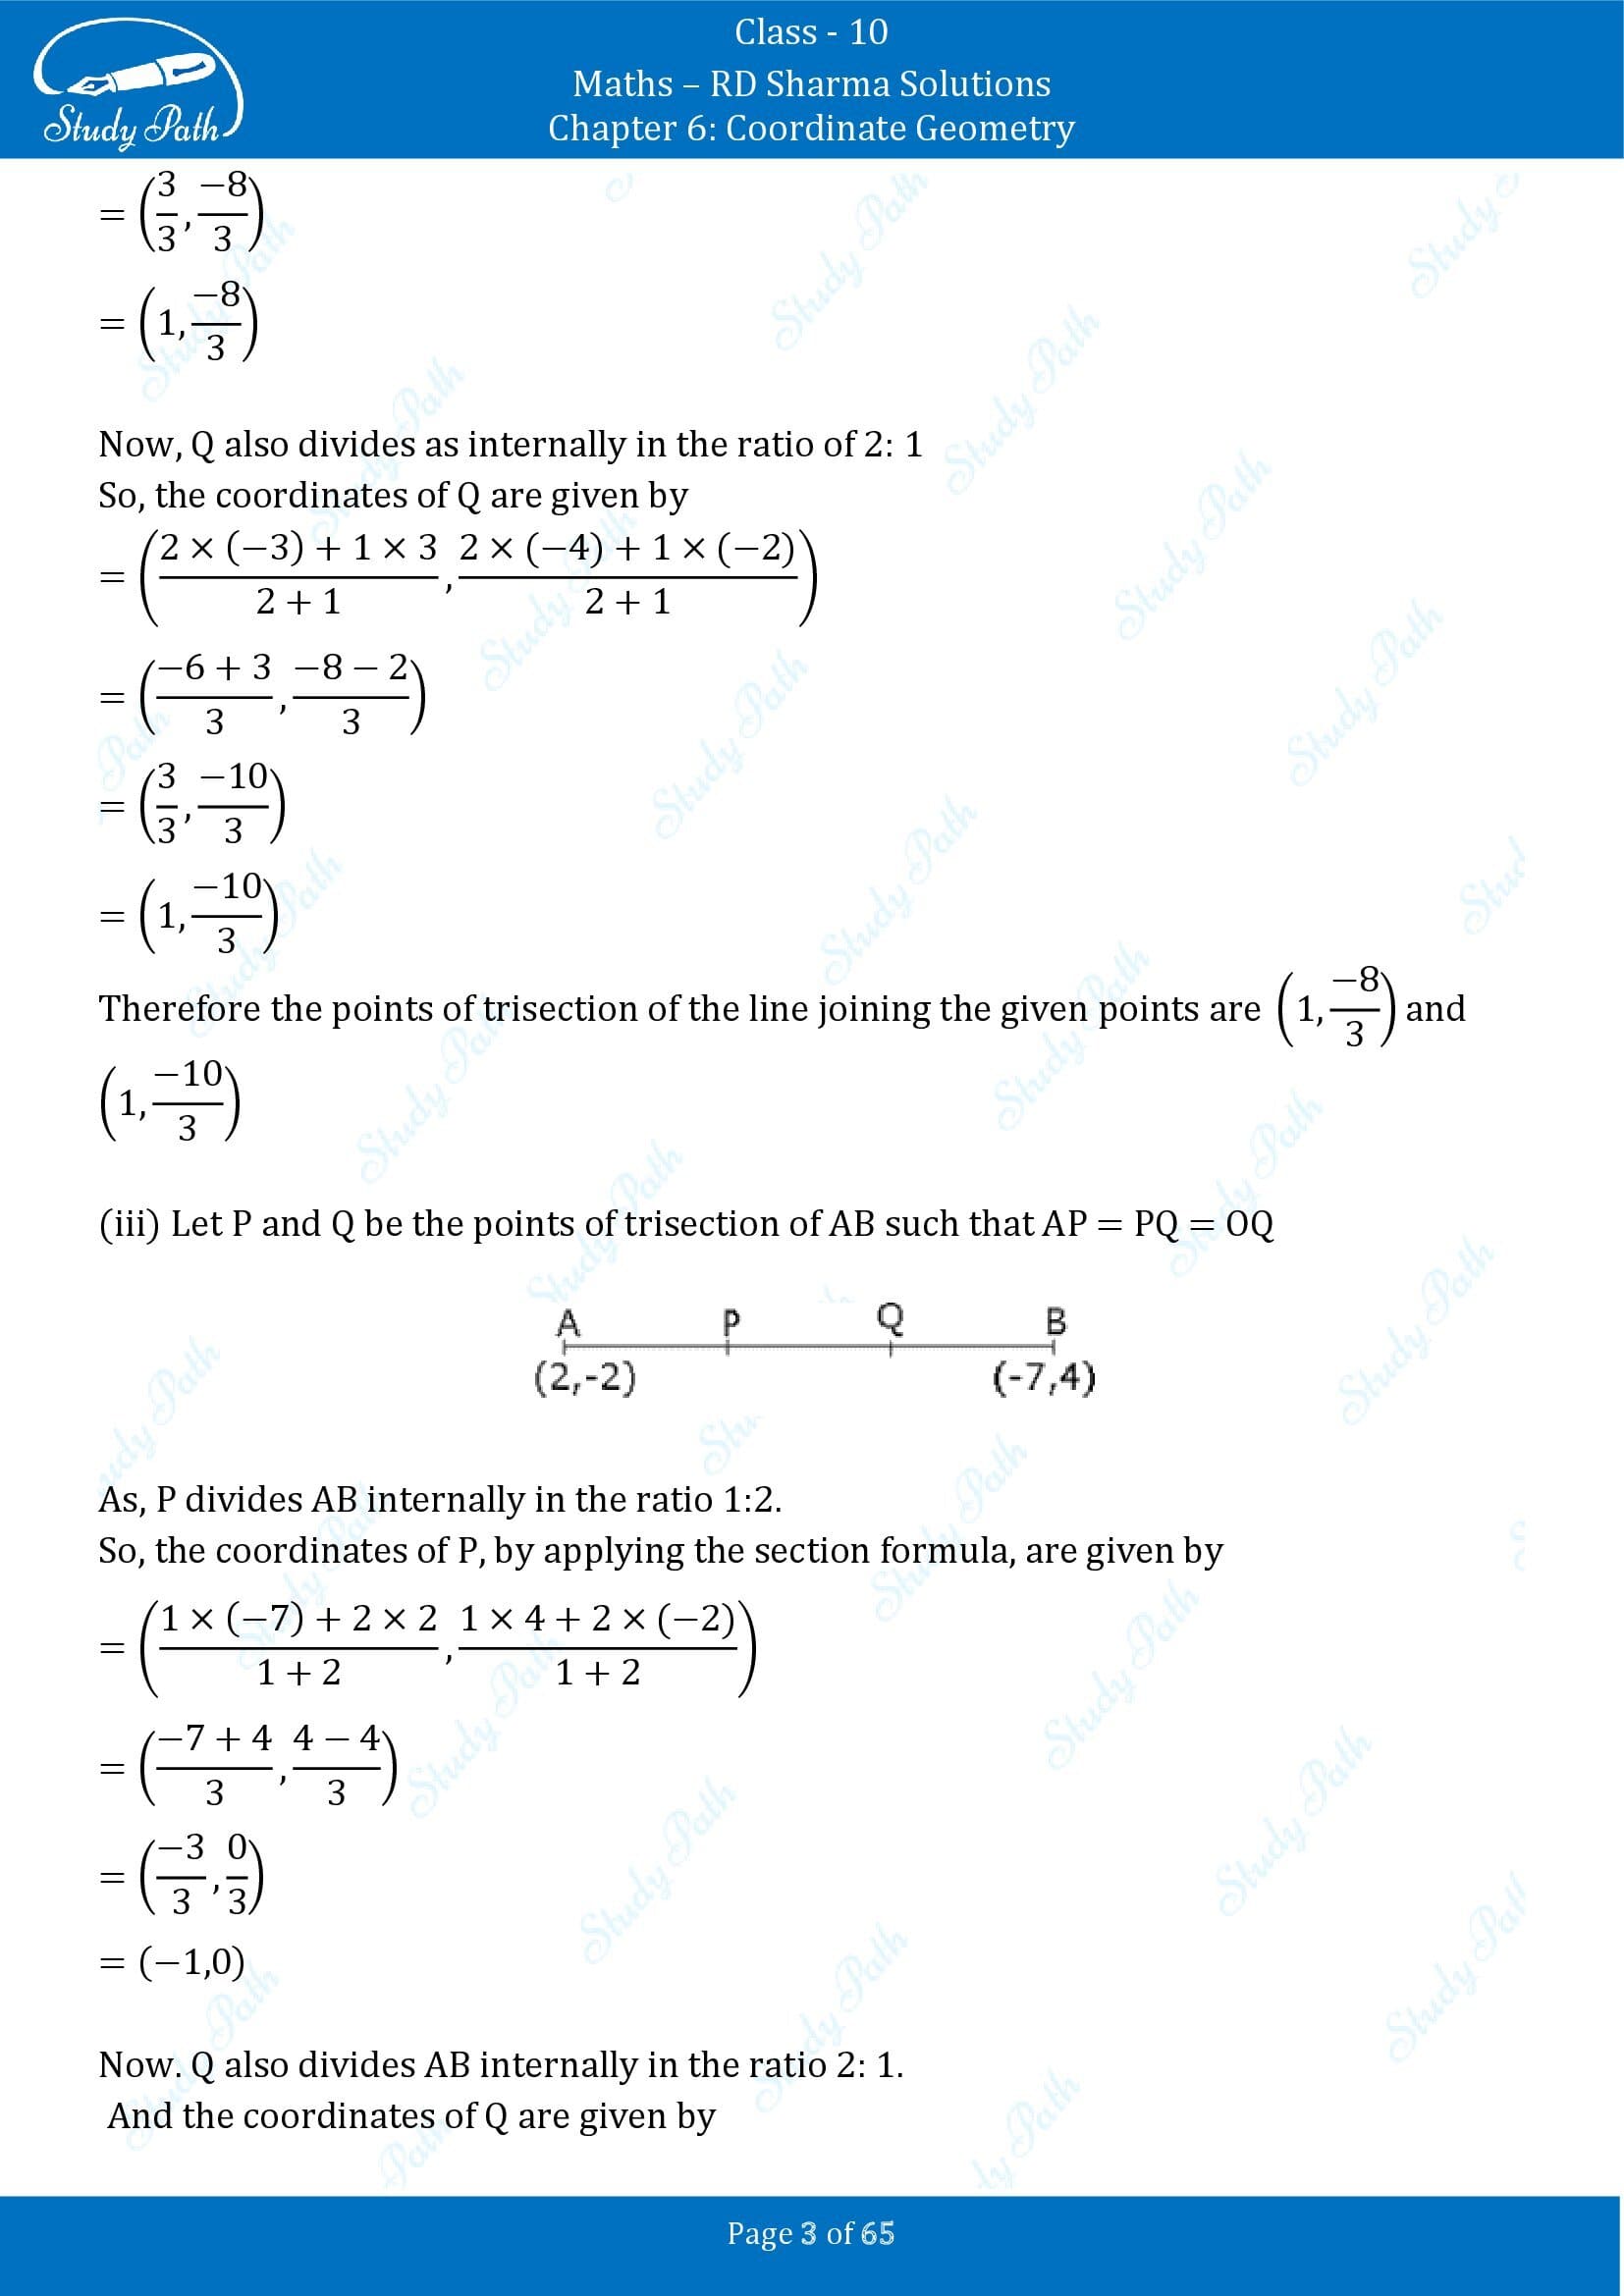 RD Sharma Solutions Class 10 Chapter 6 Coordinate Geometry Exercise 6.3 00003